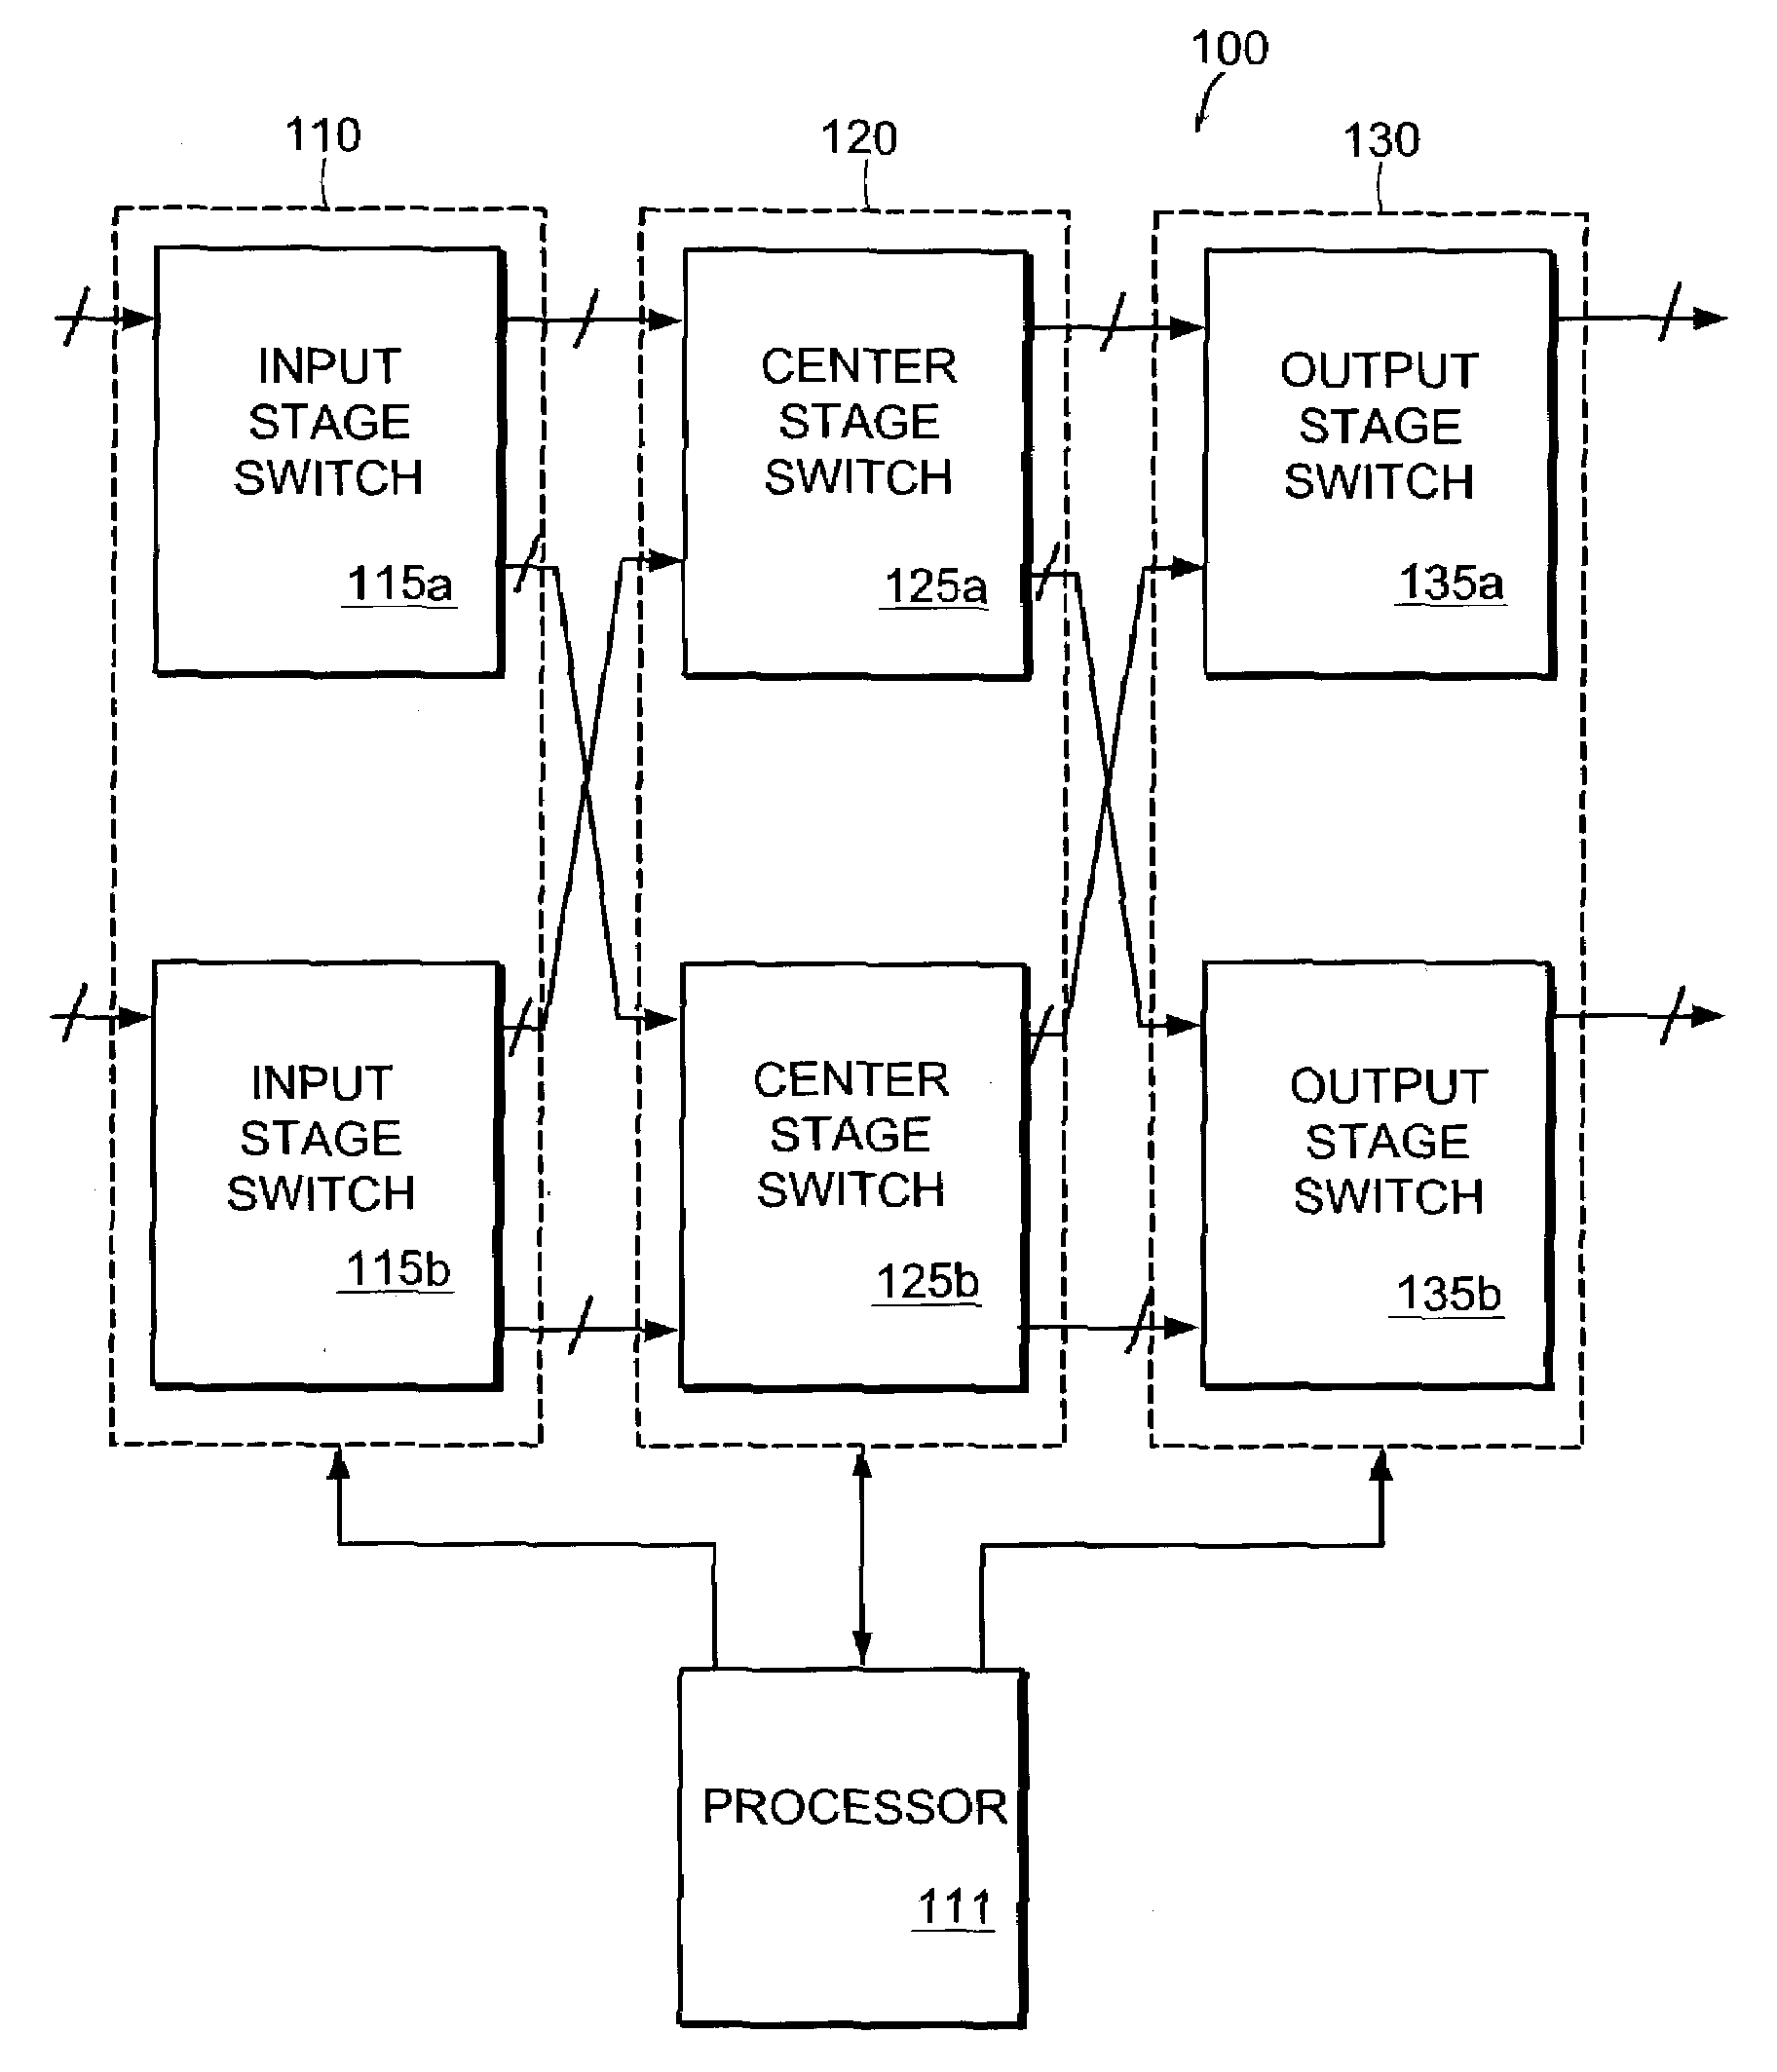 Scheduling connections in a multi-stage switch to retain non-blocking properties of constituent switching elements